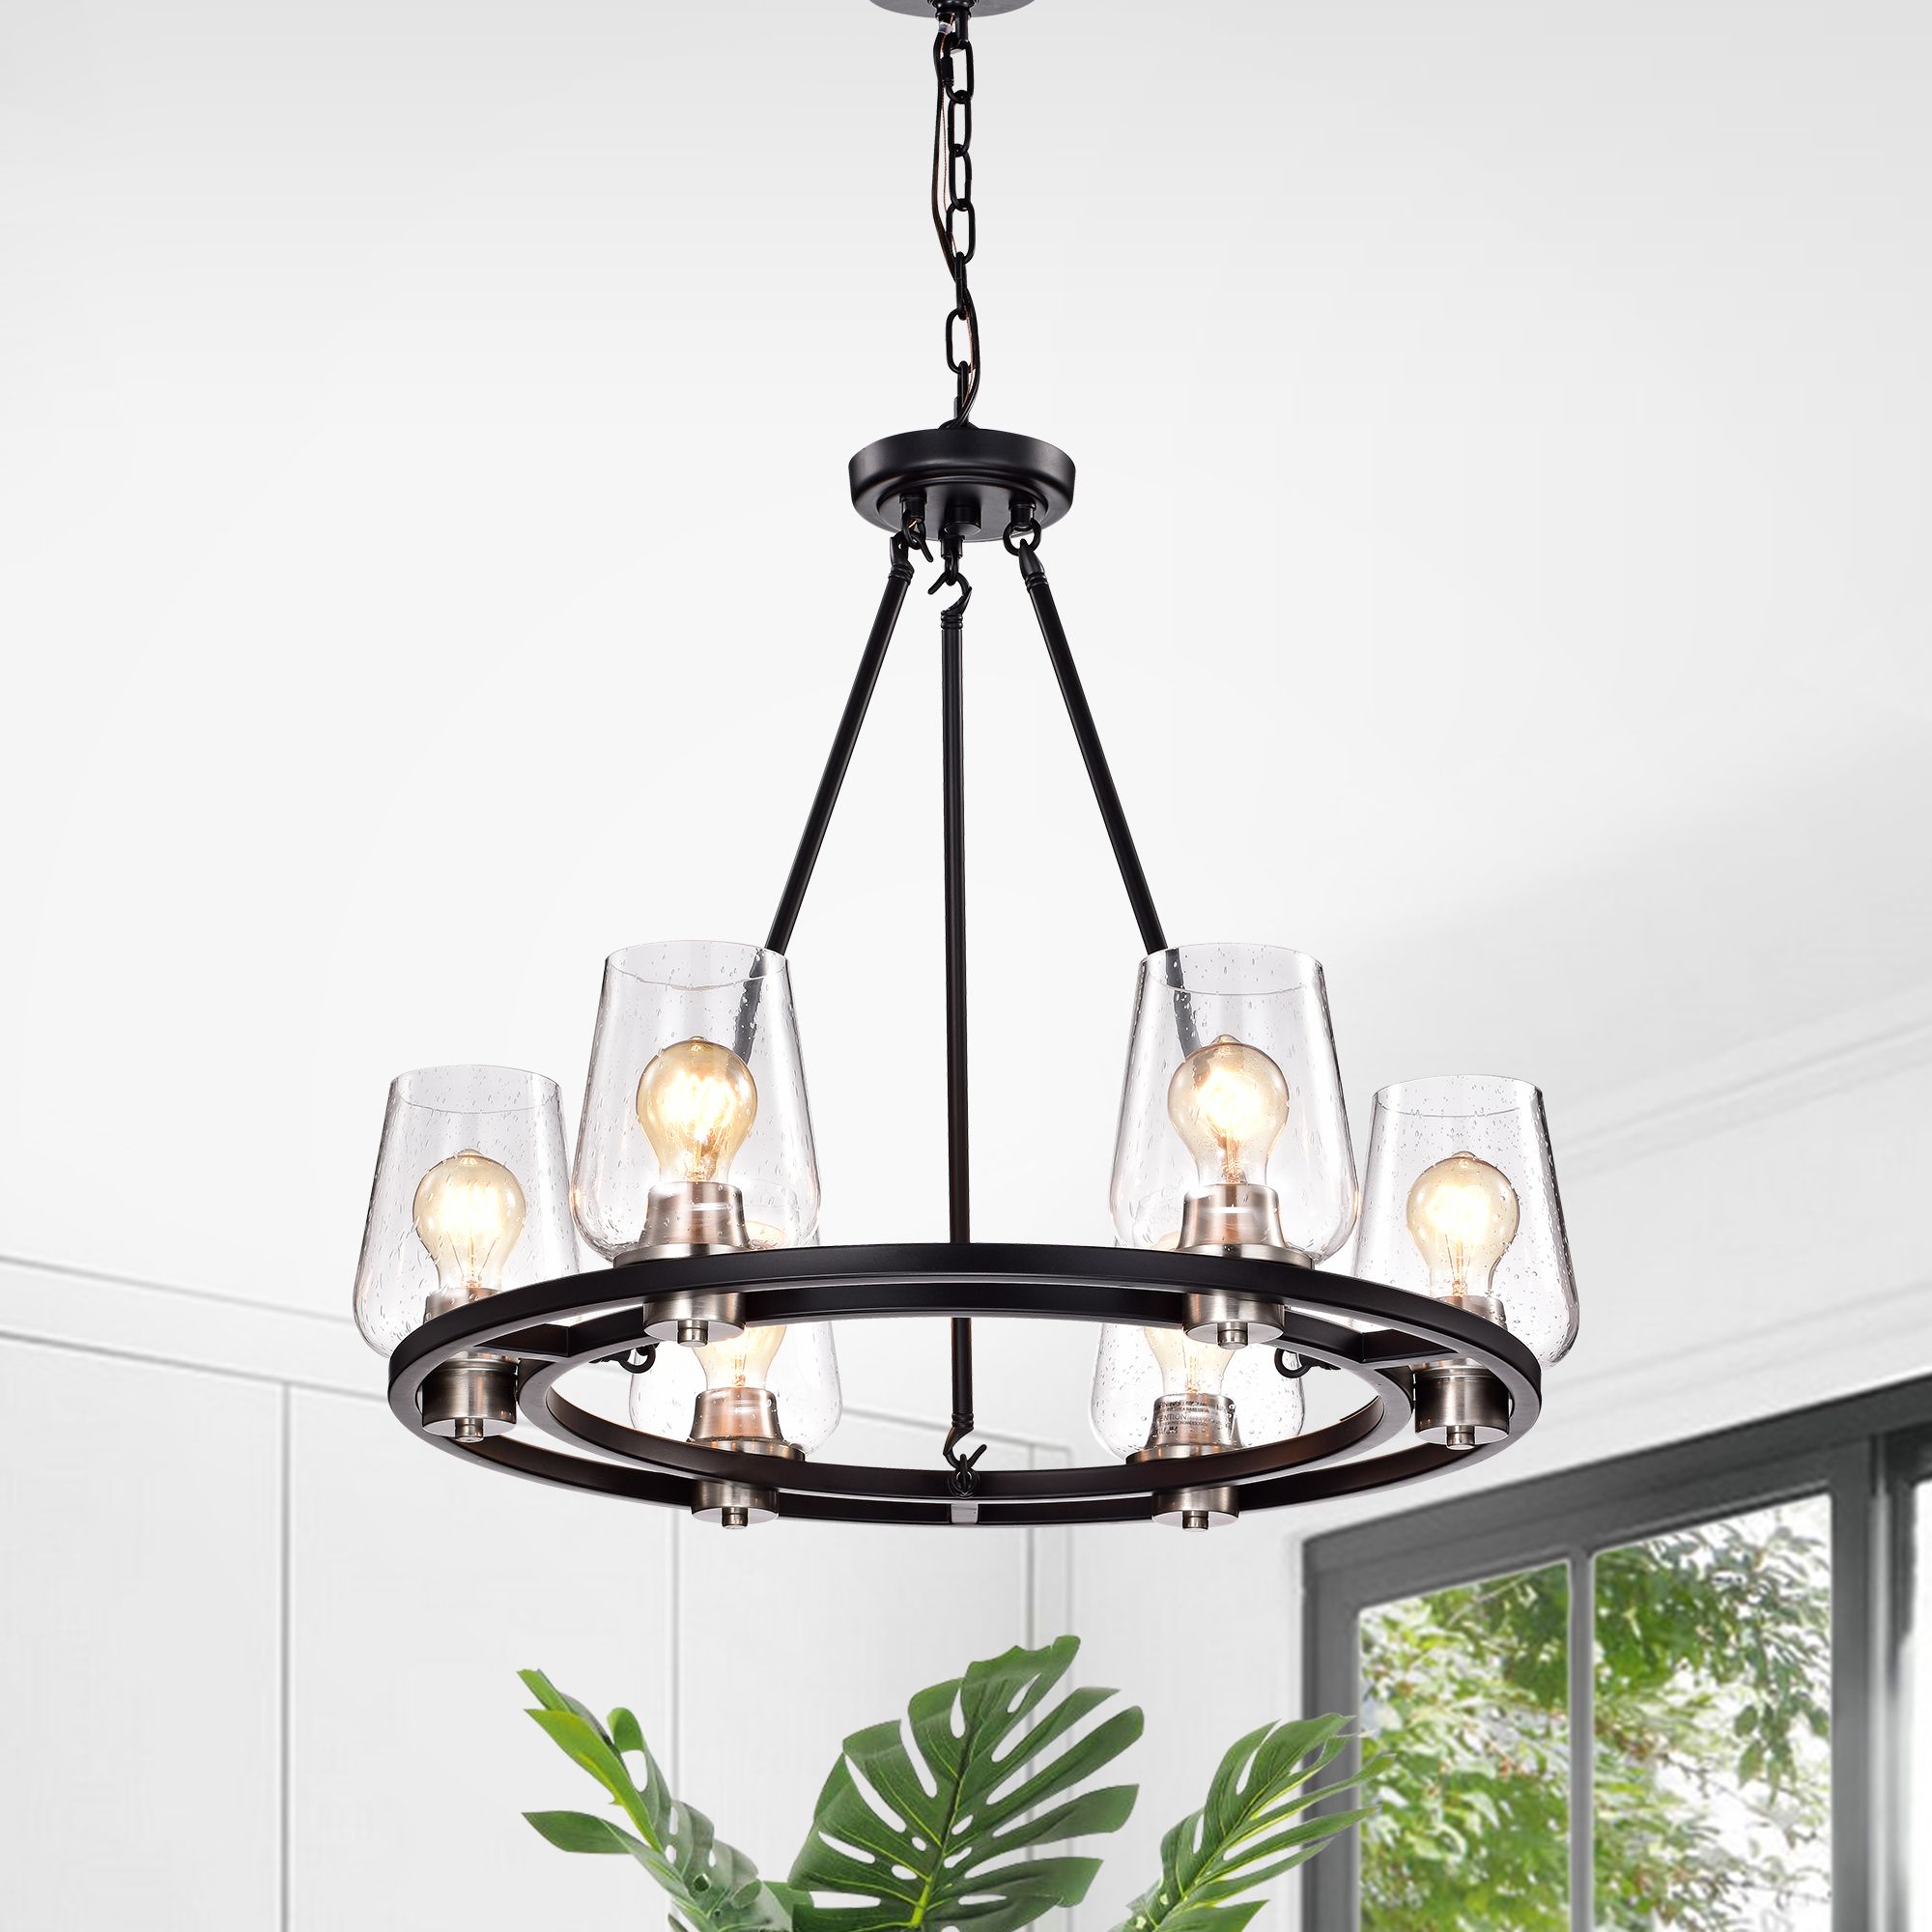 6 Light Black And Brushed Nickel Circular Chandelier With Intended For Six Light Chandeliers (View 2 of 15)